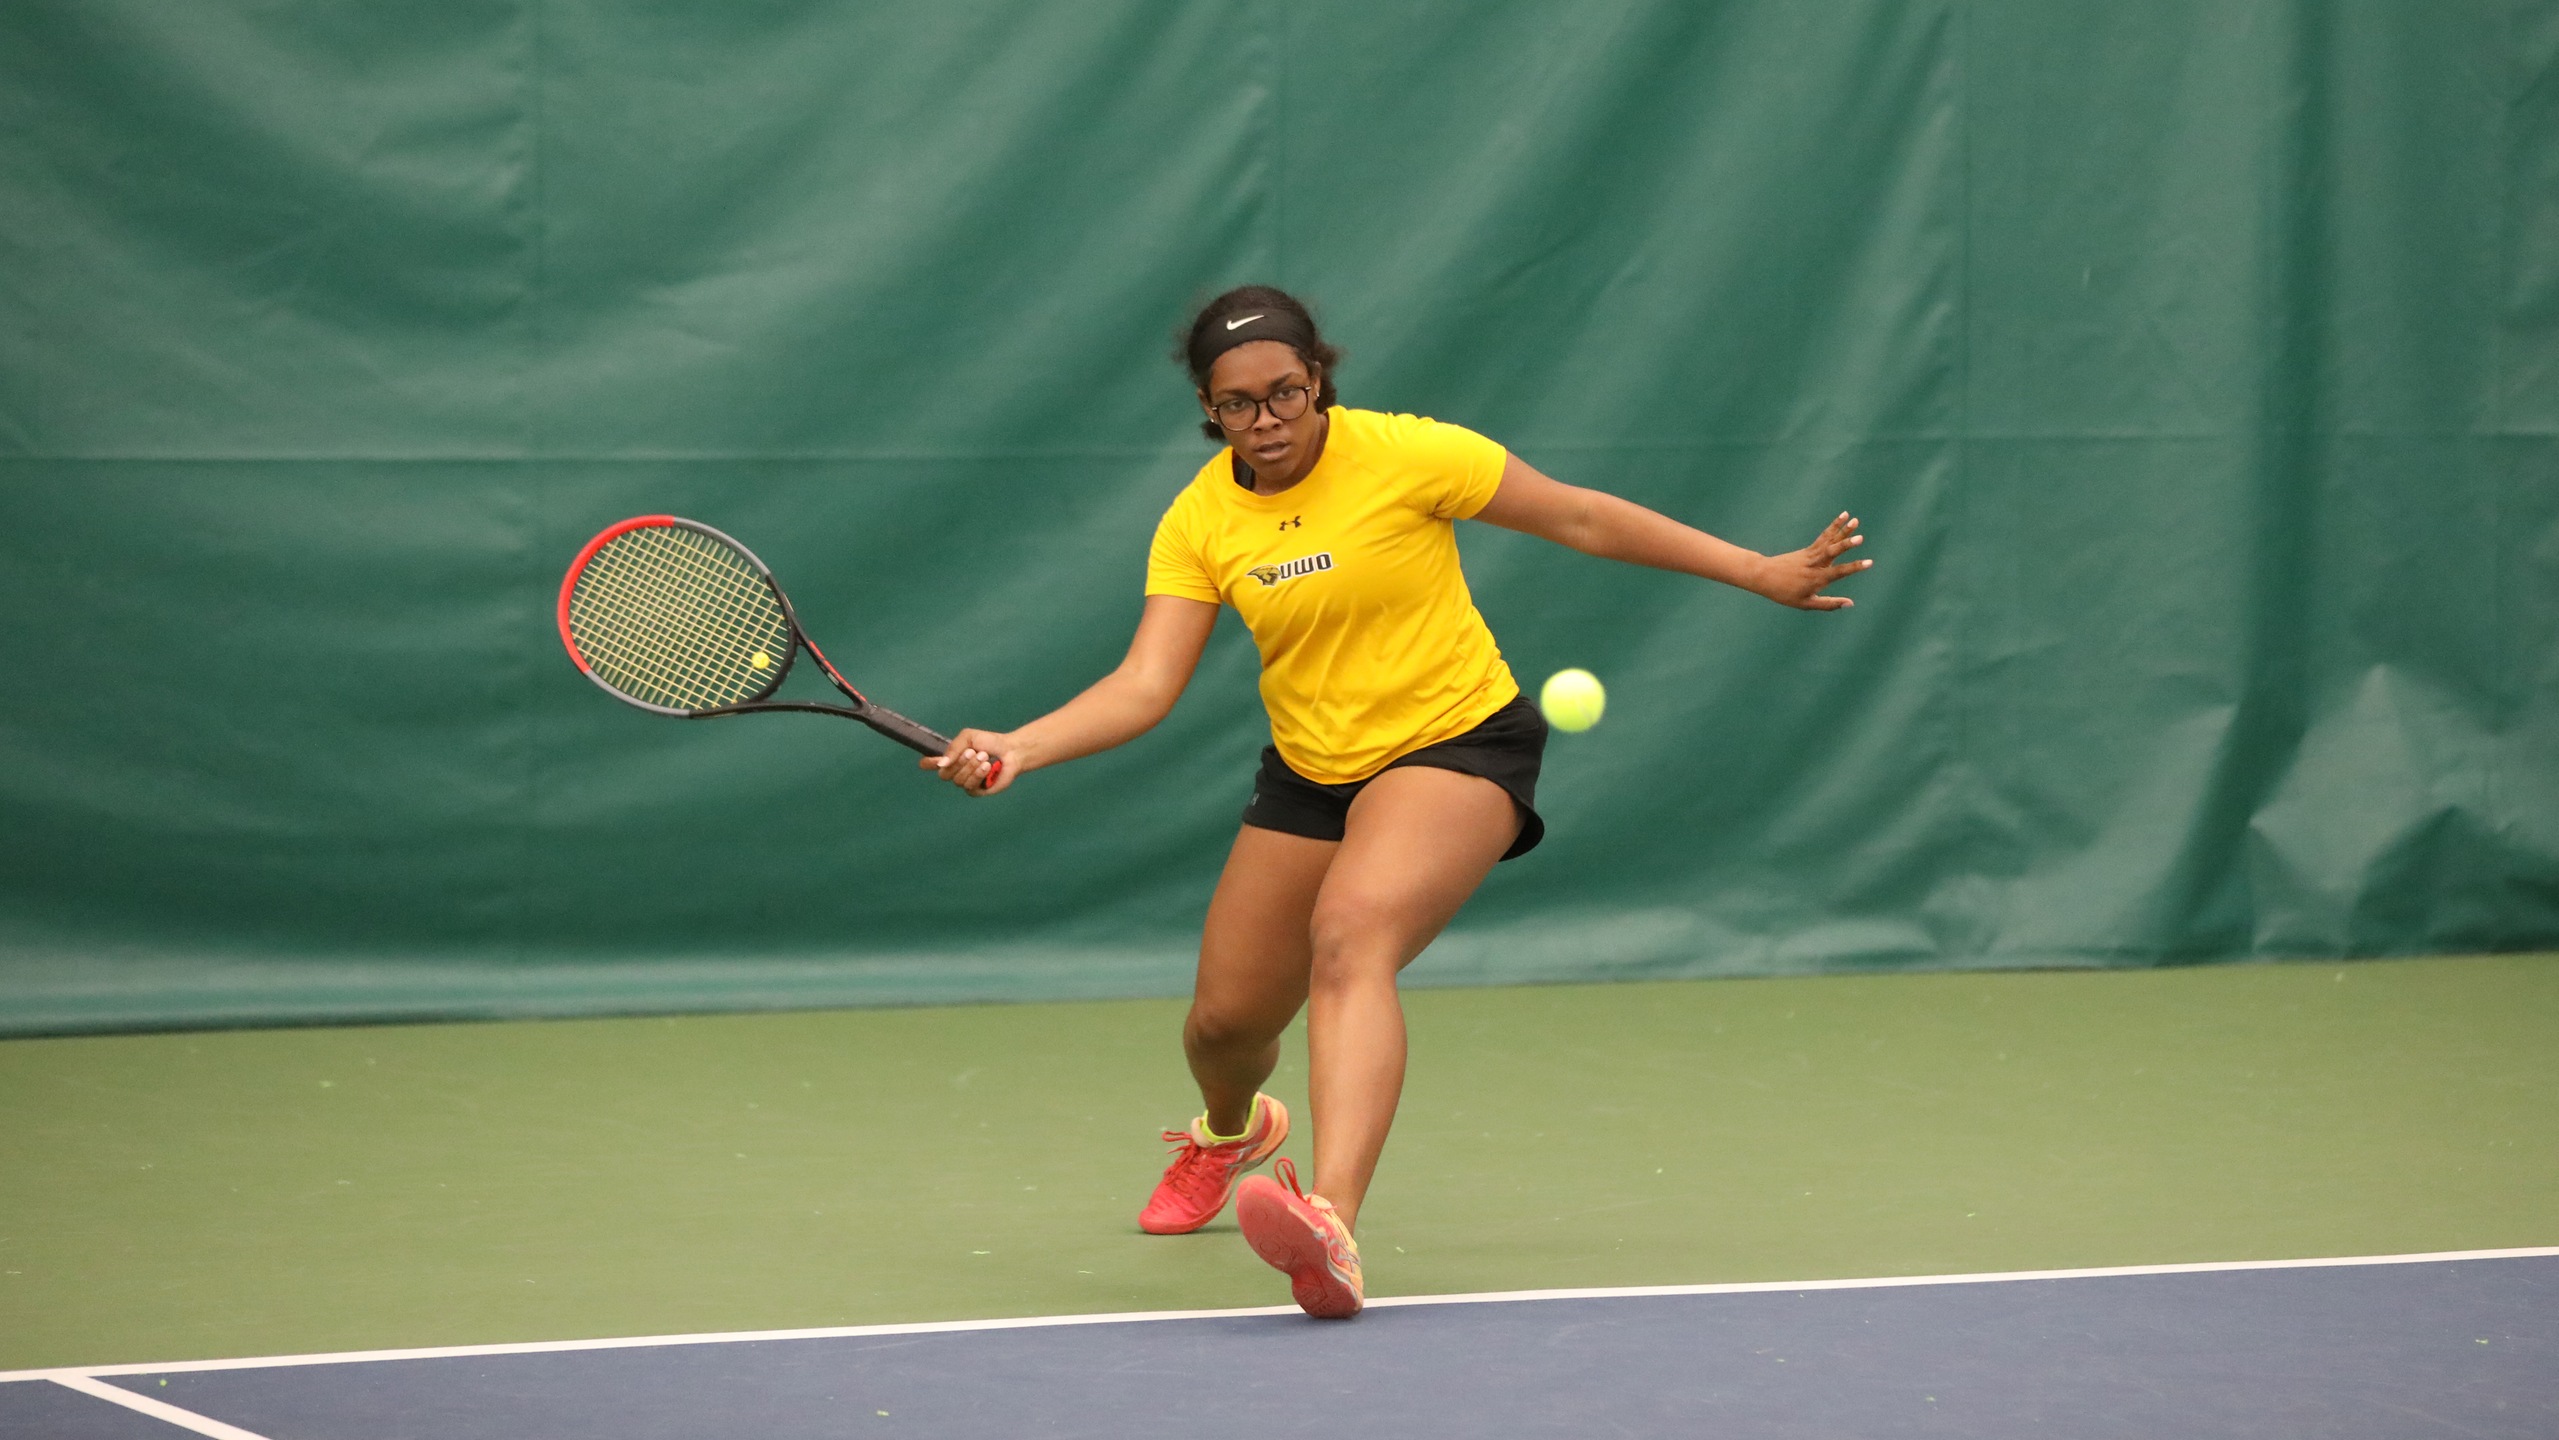 Michelle Spicer recorded wins for the Titans at both No. 1 singles and No. 1 doubles against the Falcons.